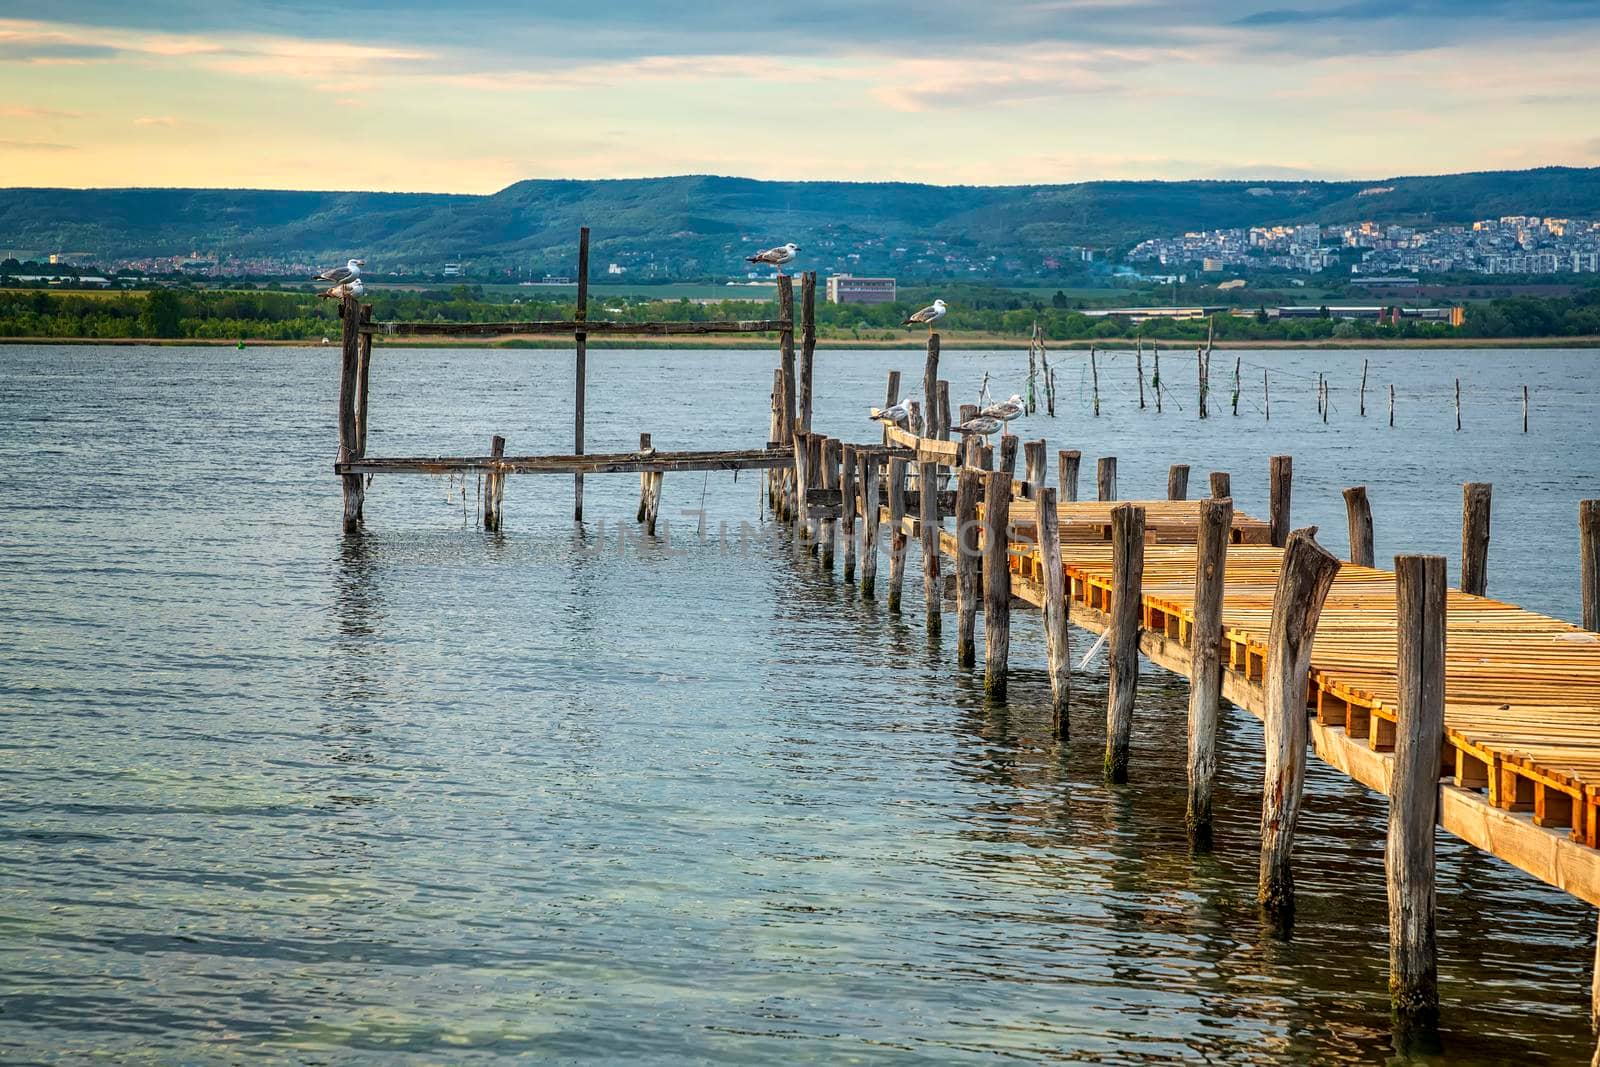 Exciting sunset at the shore with a wooden pier and sitting gulls. by EdVal